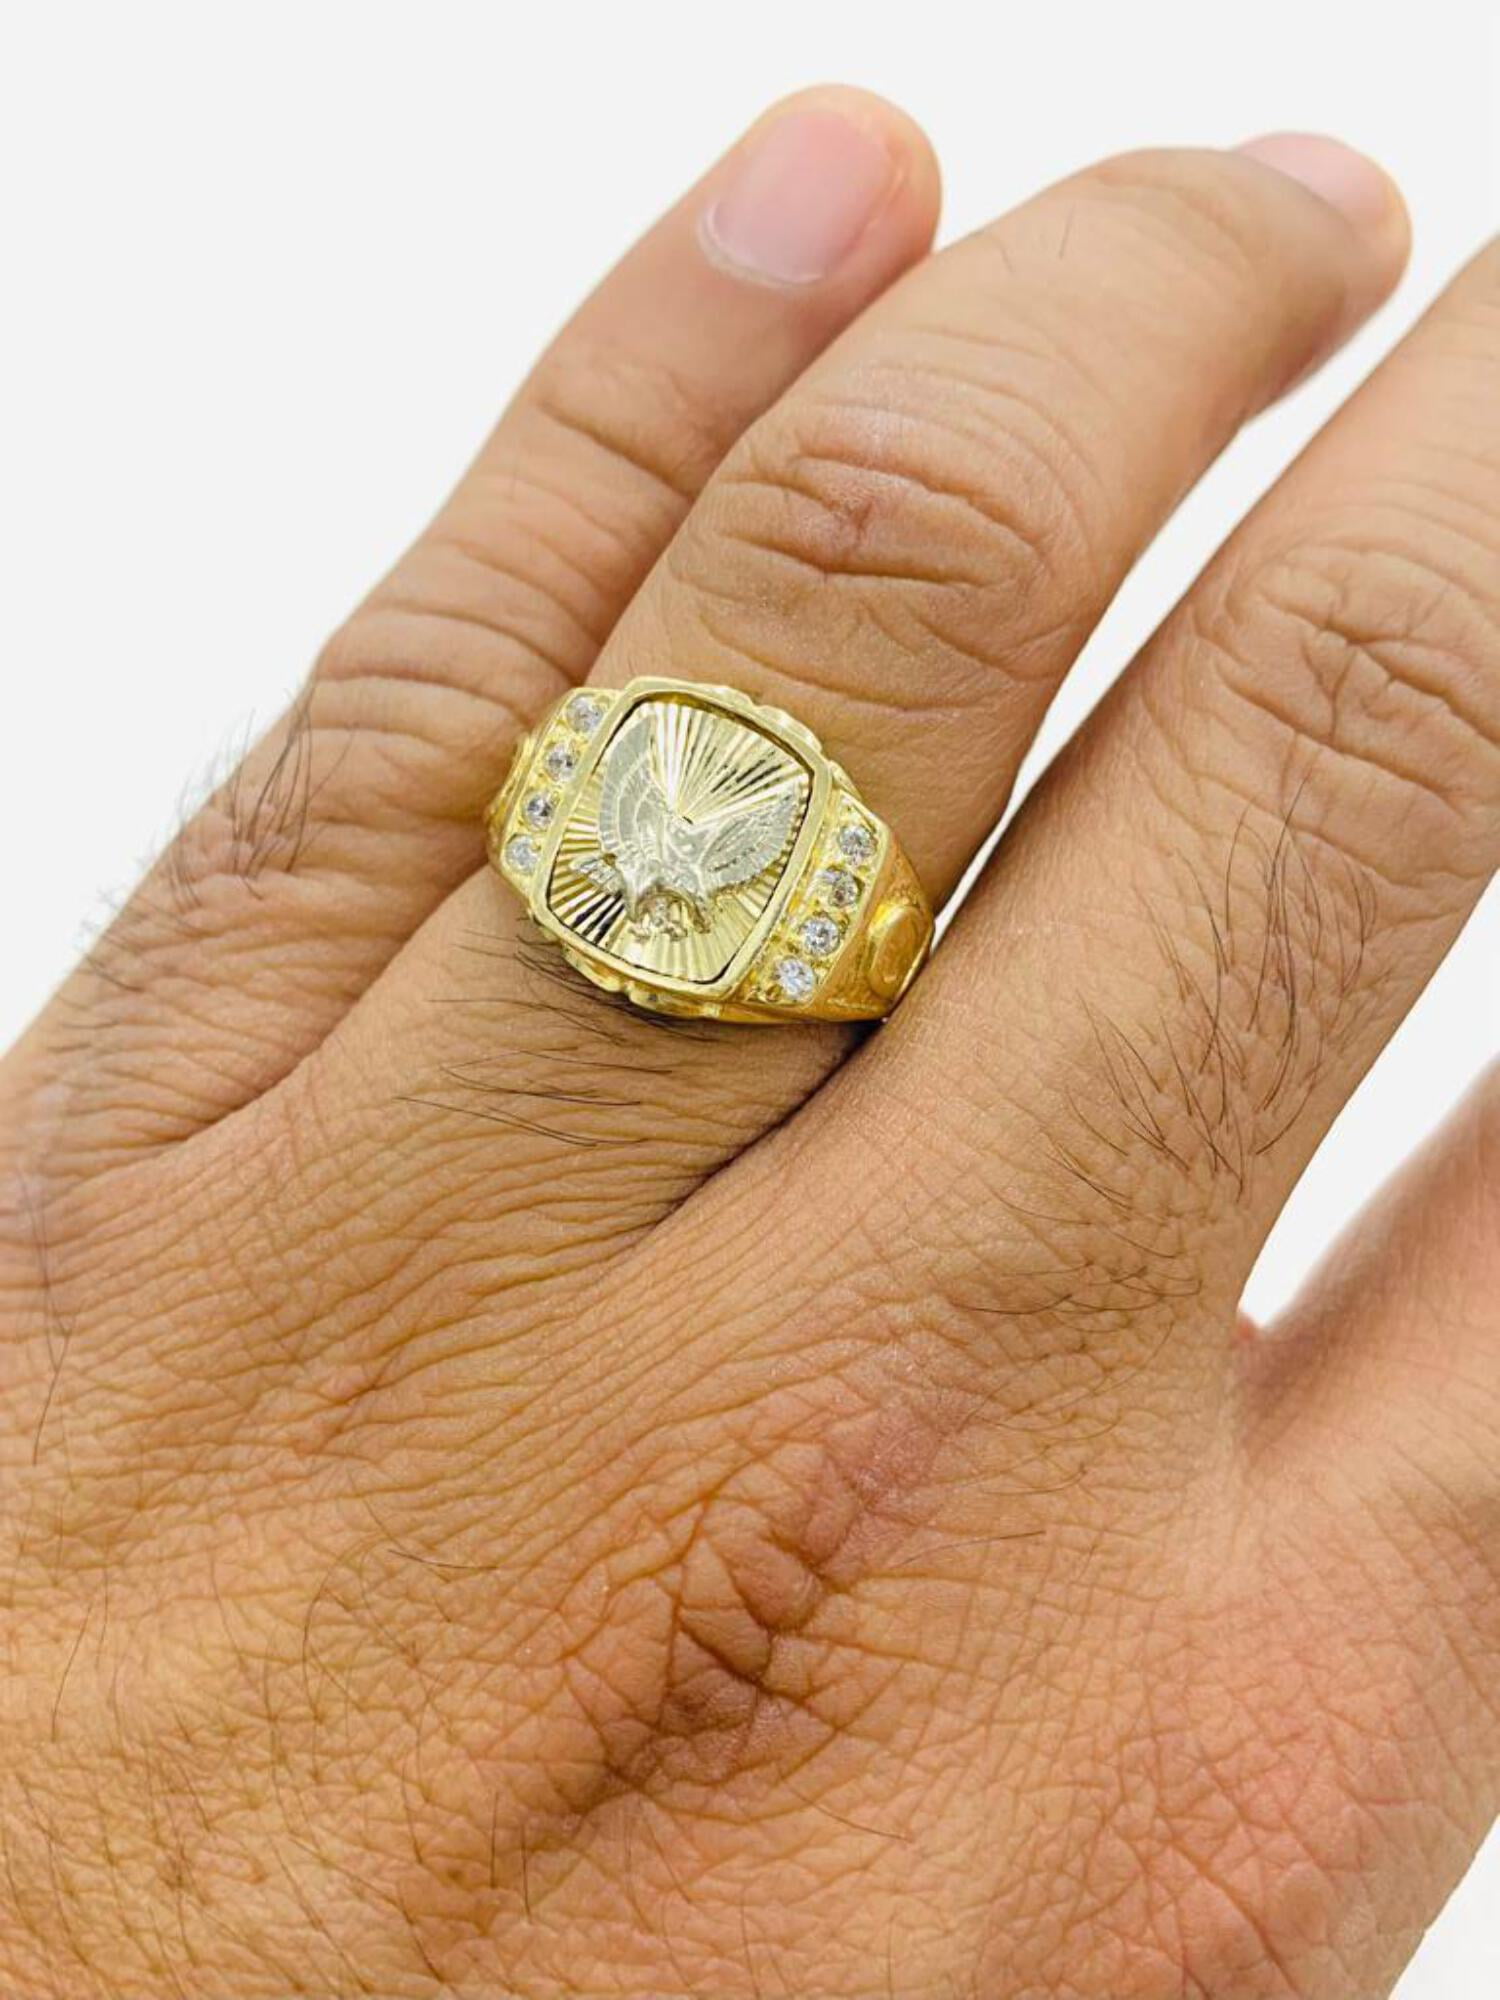 14k Yellow Gold Mens Signet Ring Size 10 Jewelry Gifts for Men - 6.2 Grams  - Walmart.com